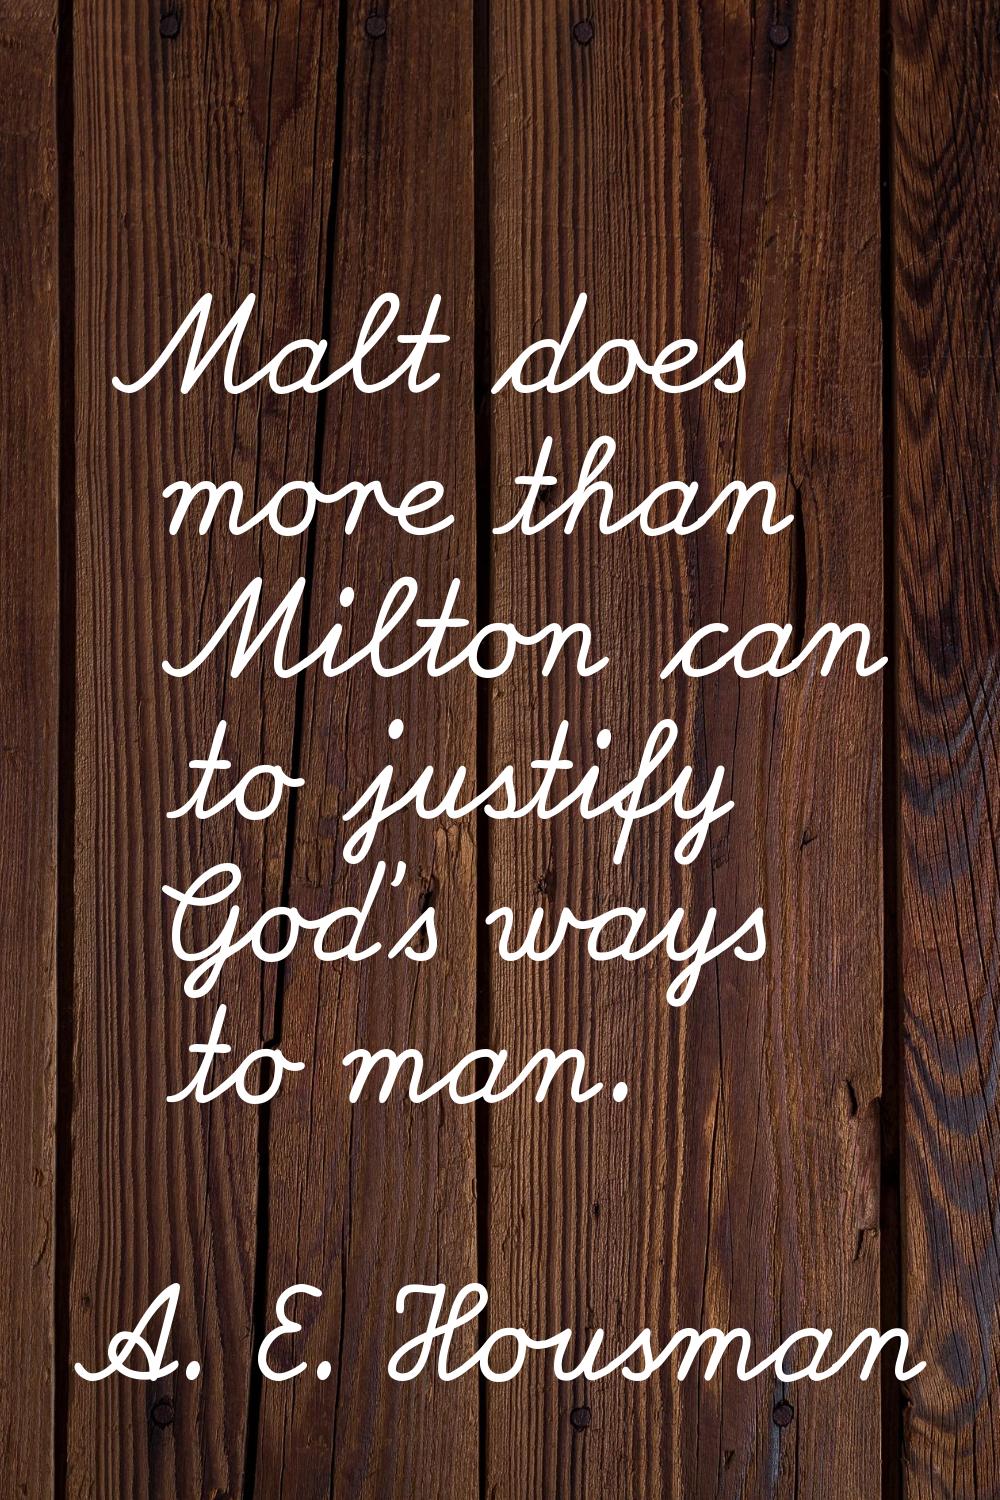 Malt does more than Milton can to justify God's ways to man.